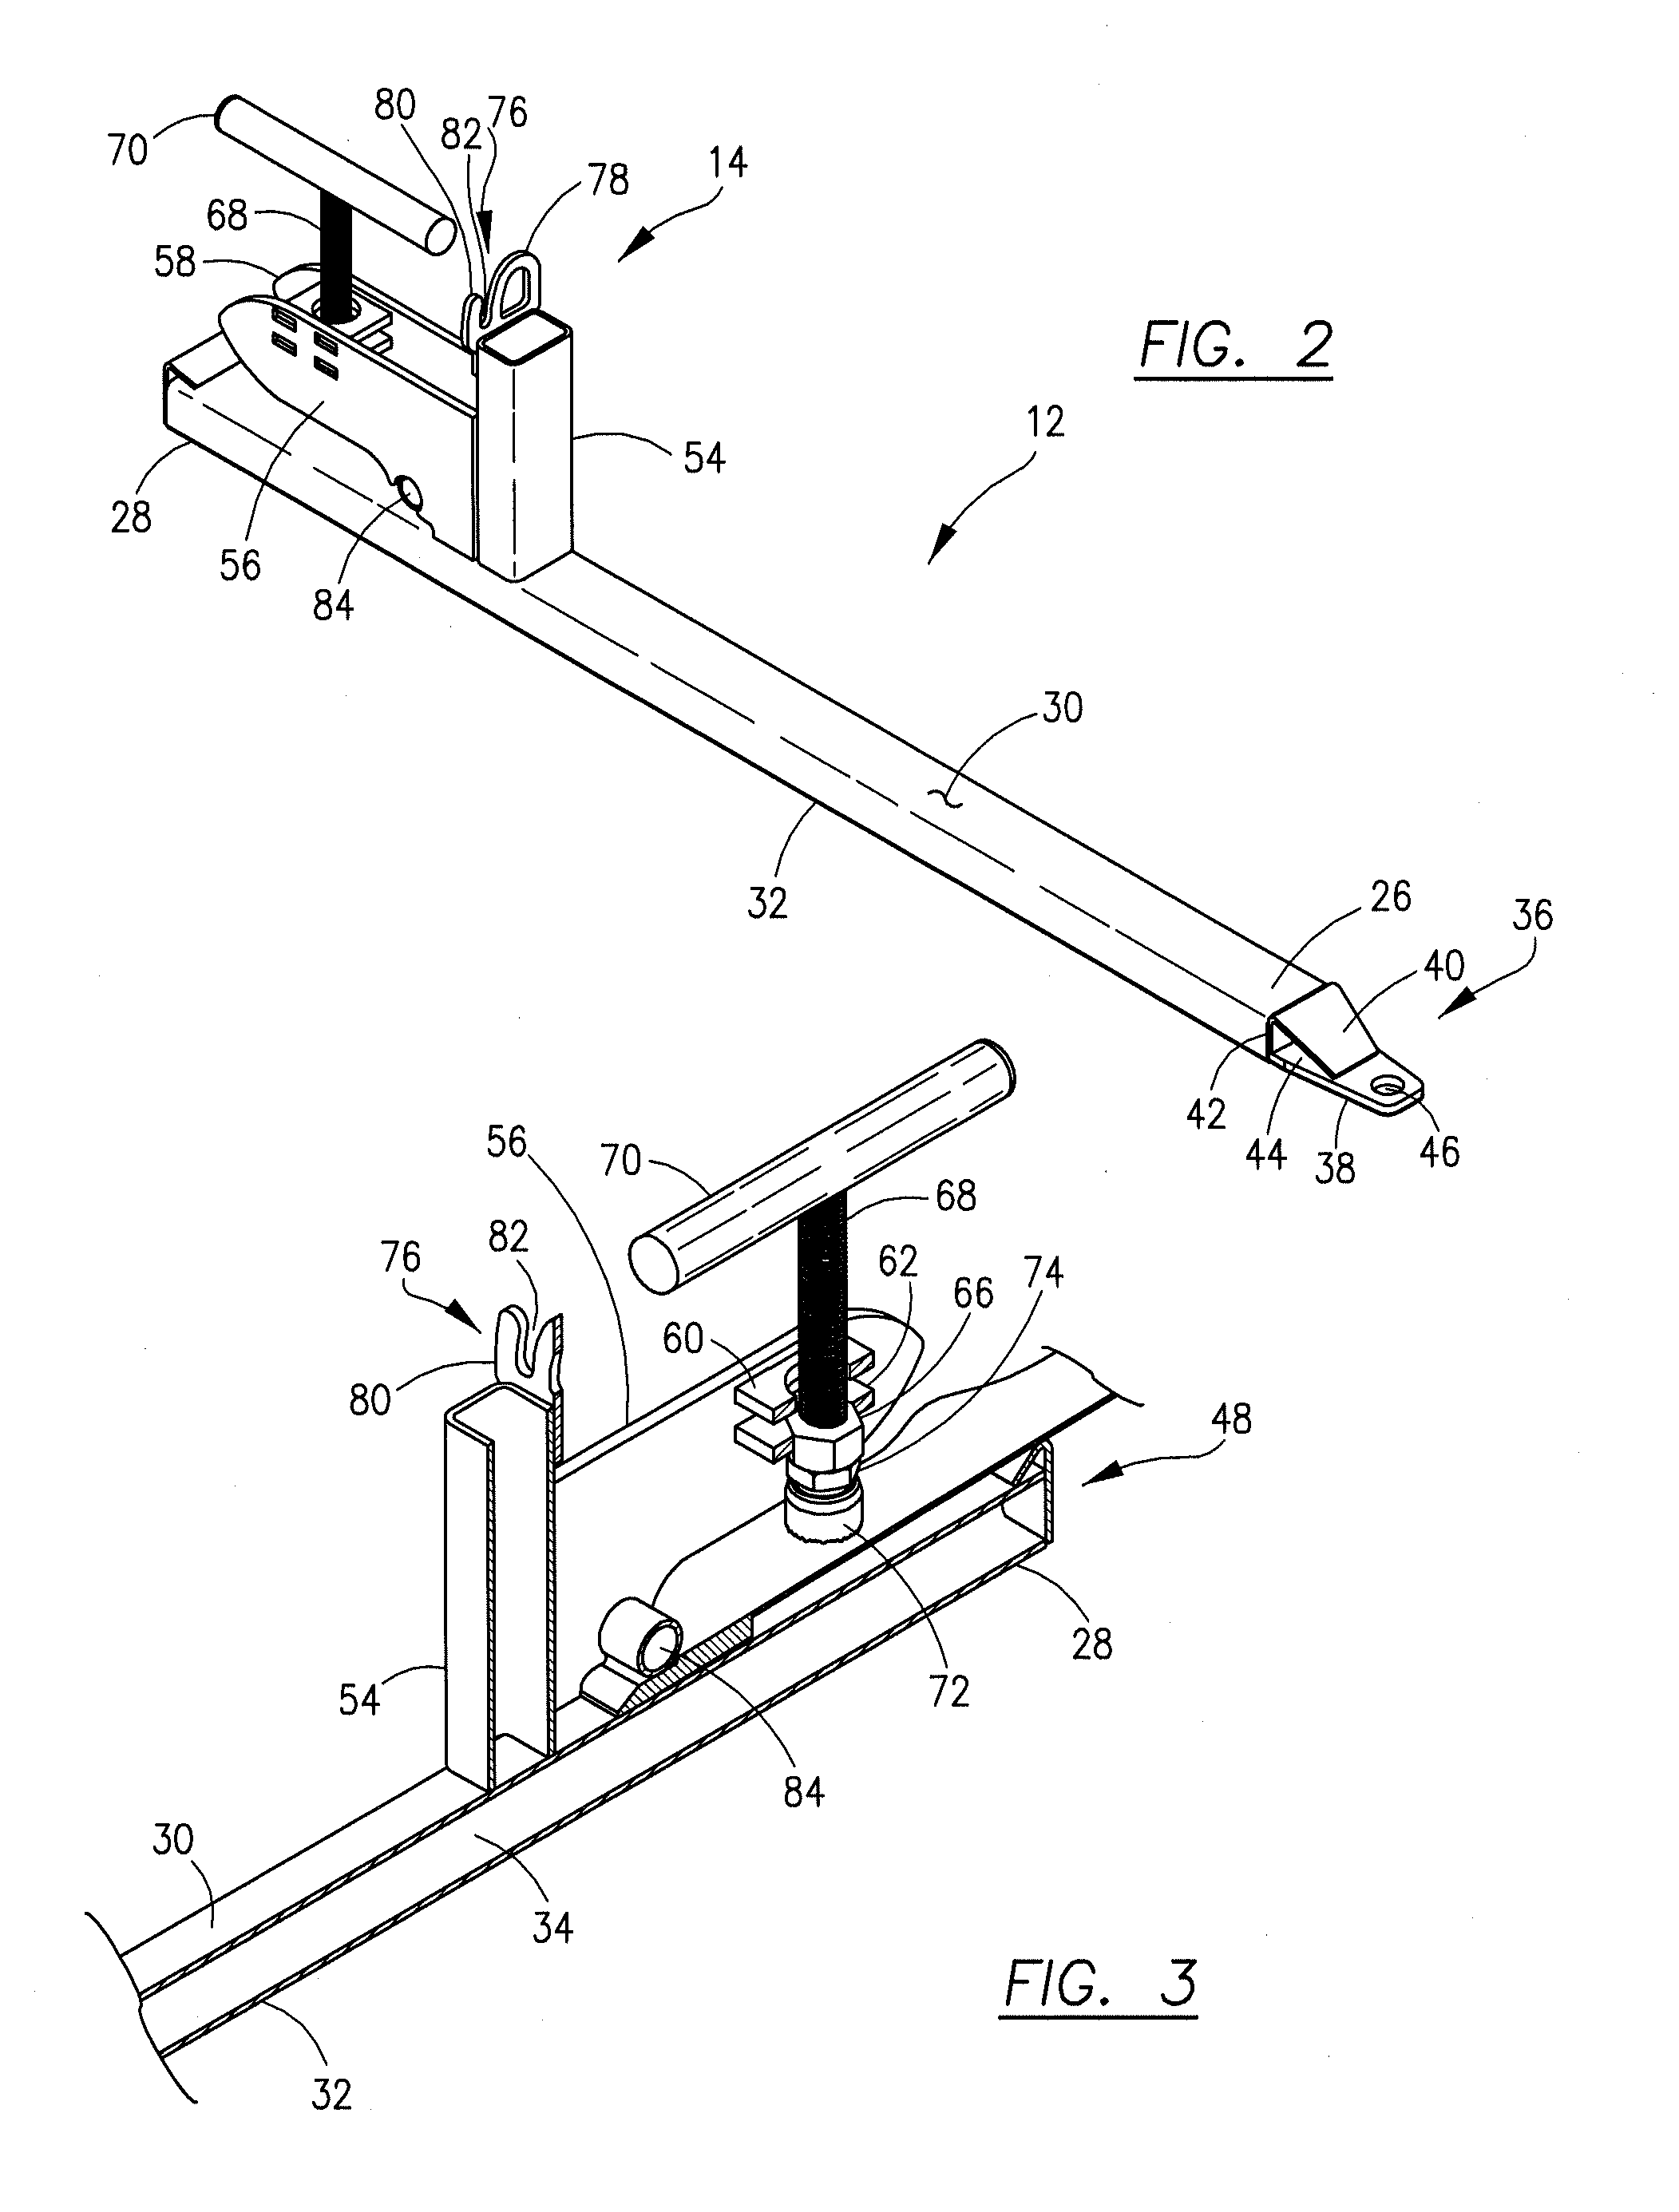 Clamp-on fork lift attachment